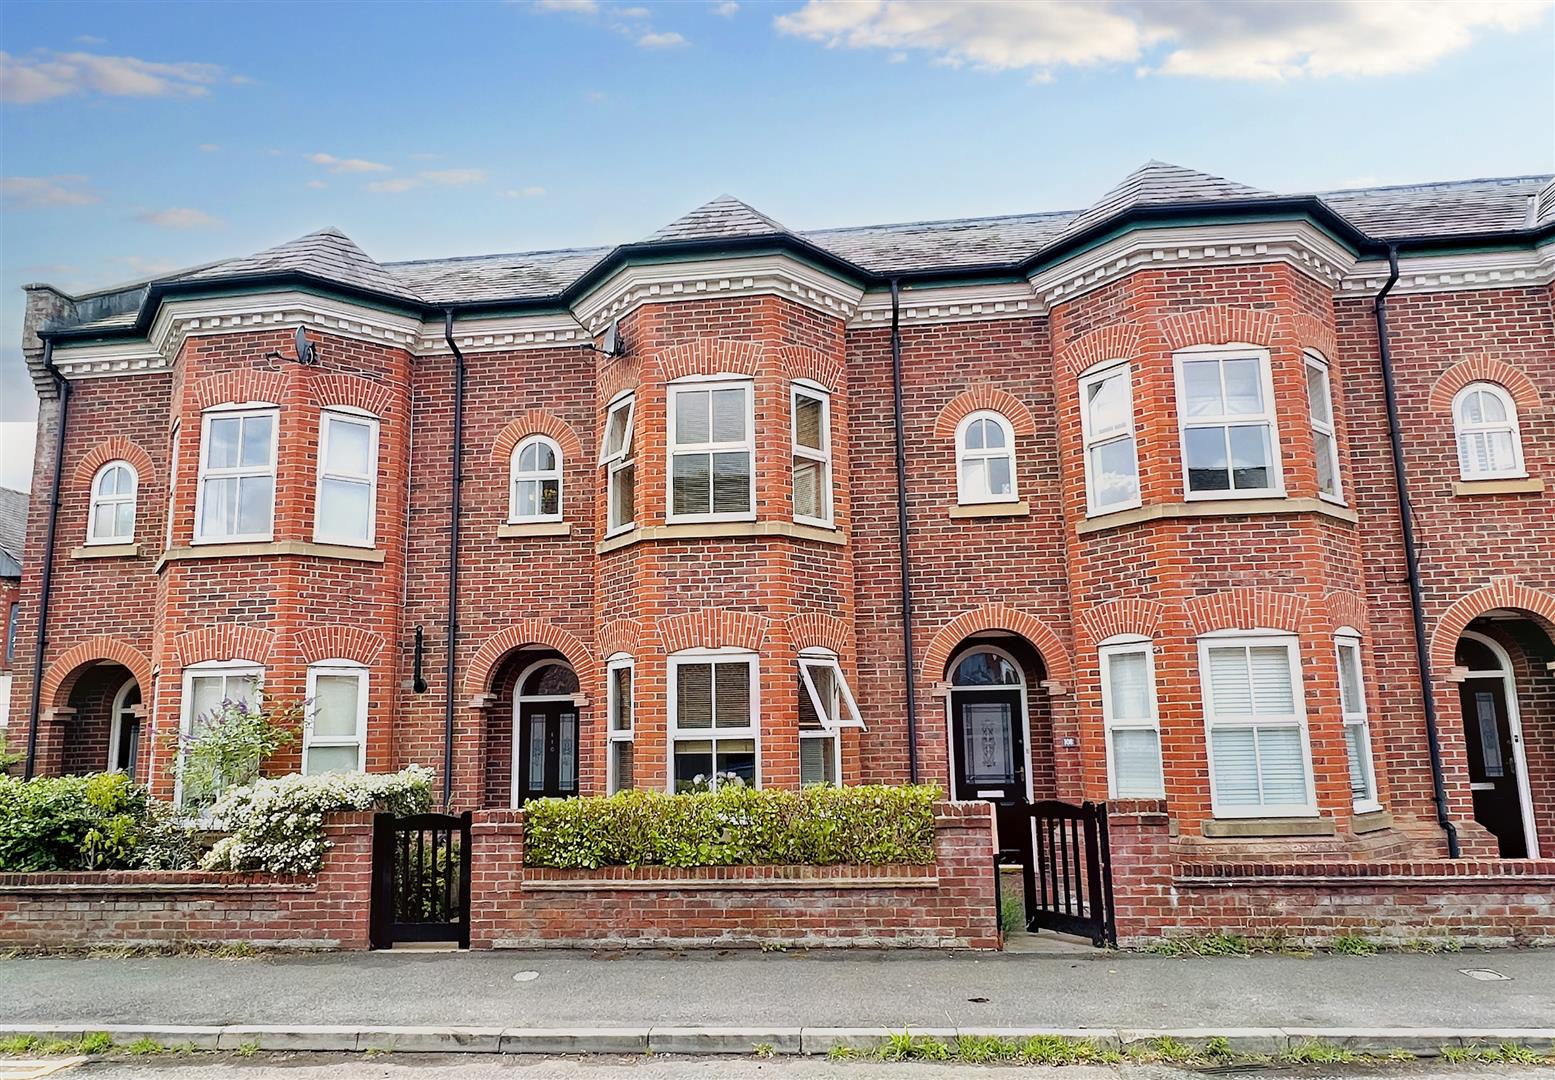 3 bed terraced house for sale in Bold Street, Altrincham - Property Image 1